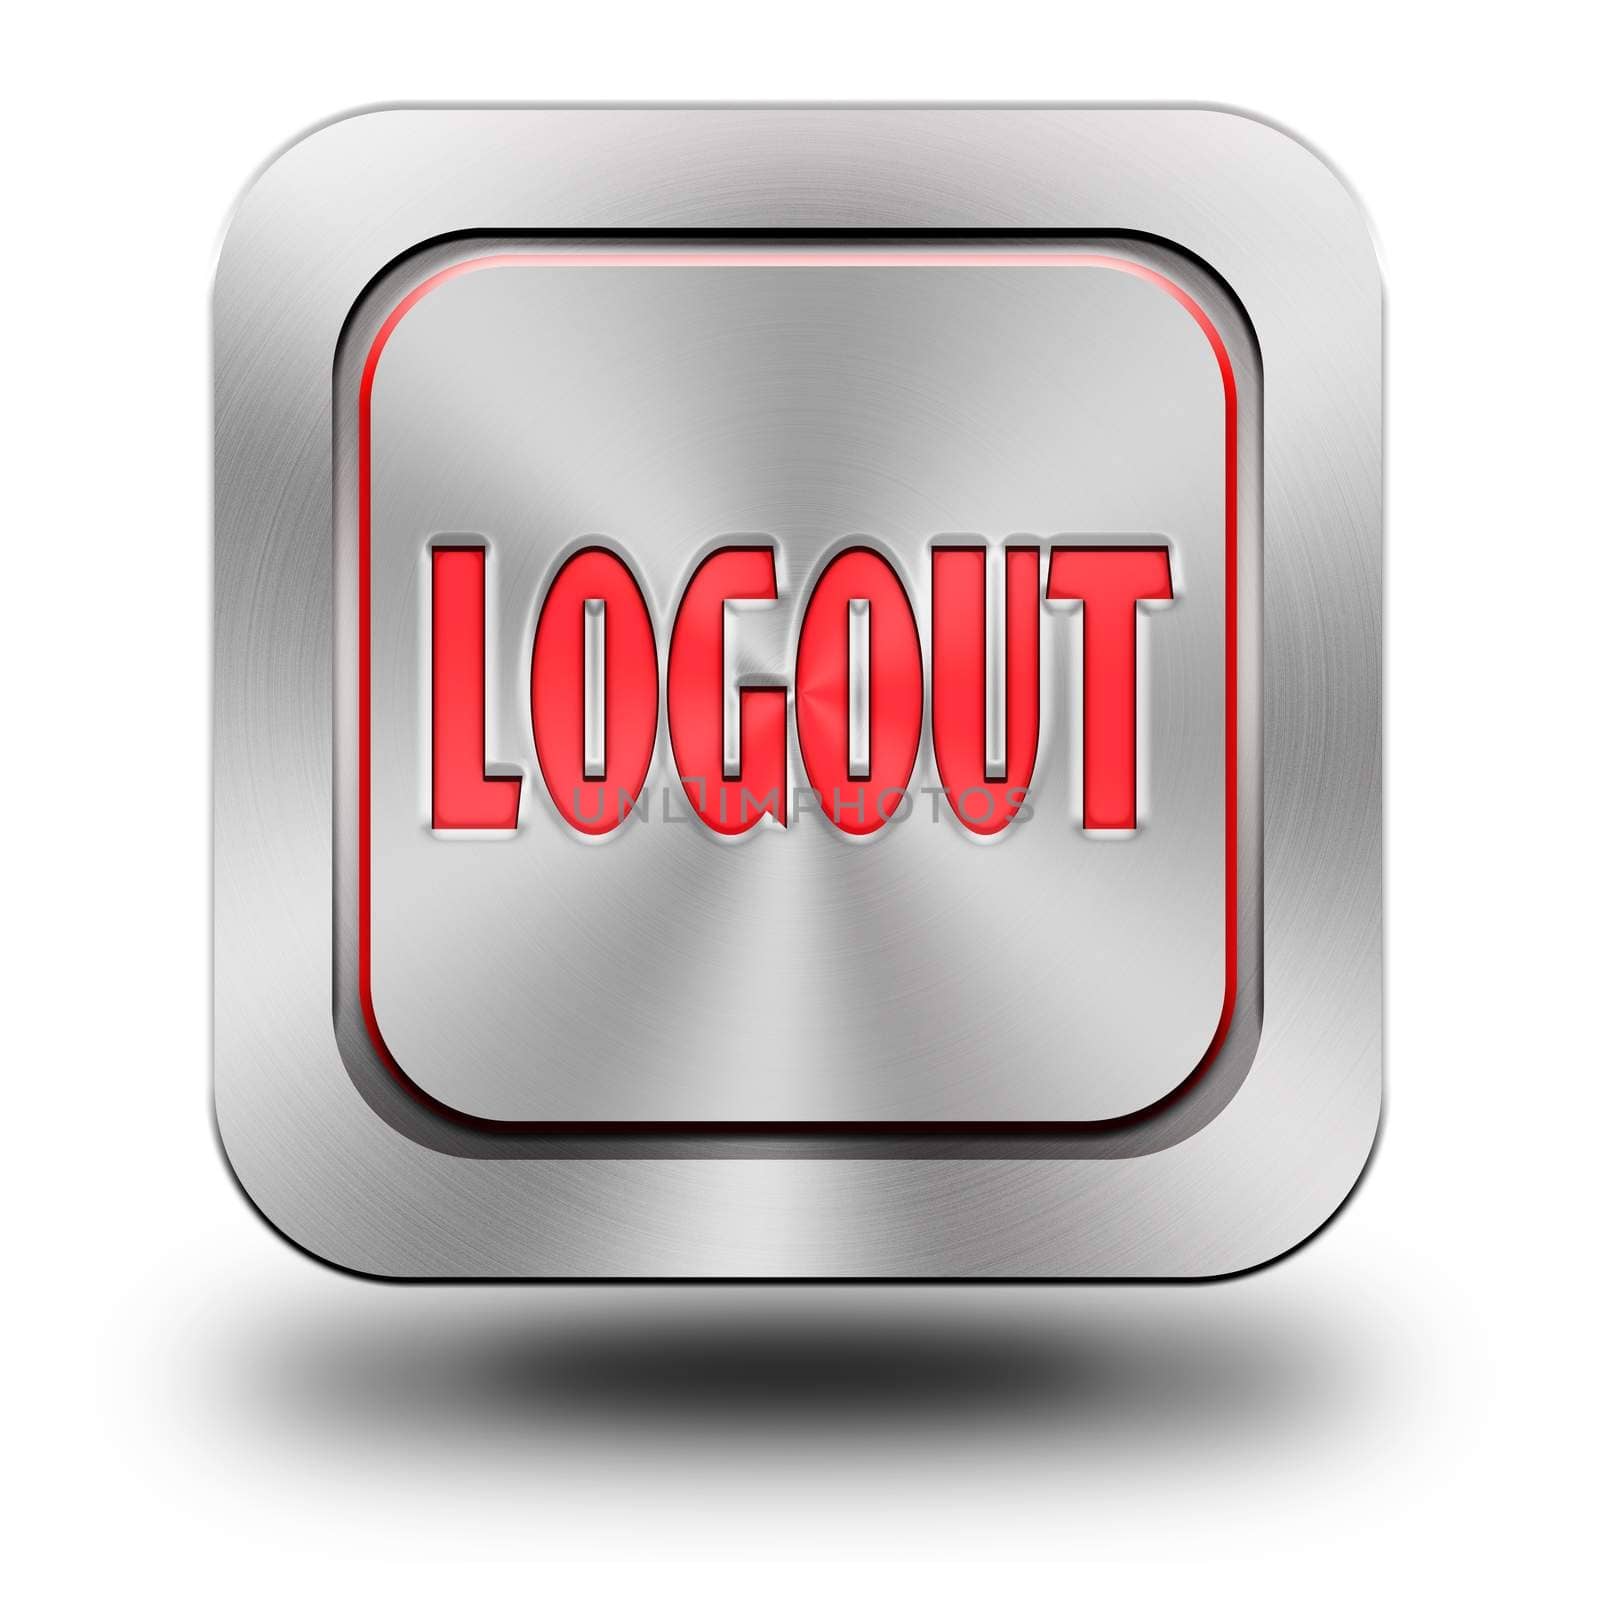 Logout, aluminum, steel, chromium, glossy, icon, button, sign, icons, buttons, crazy colors